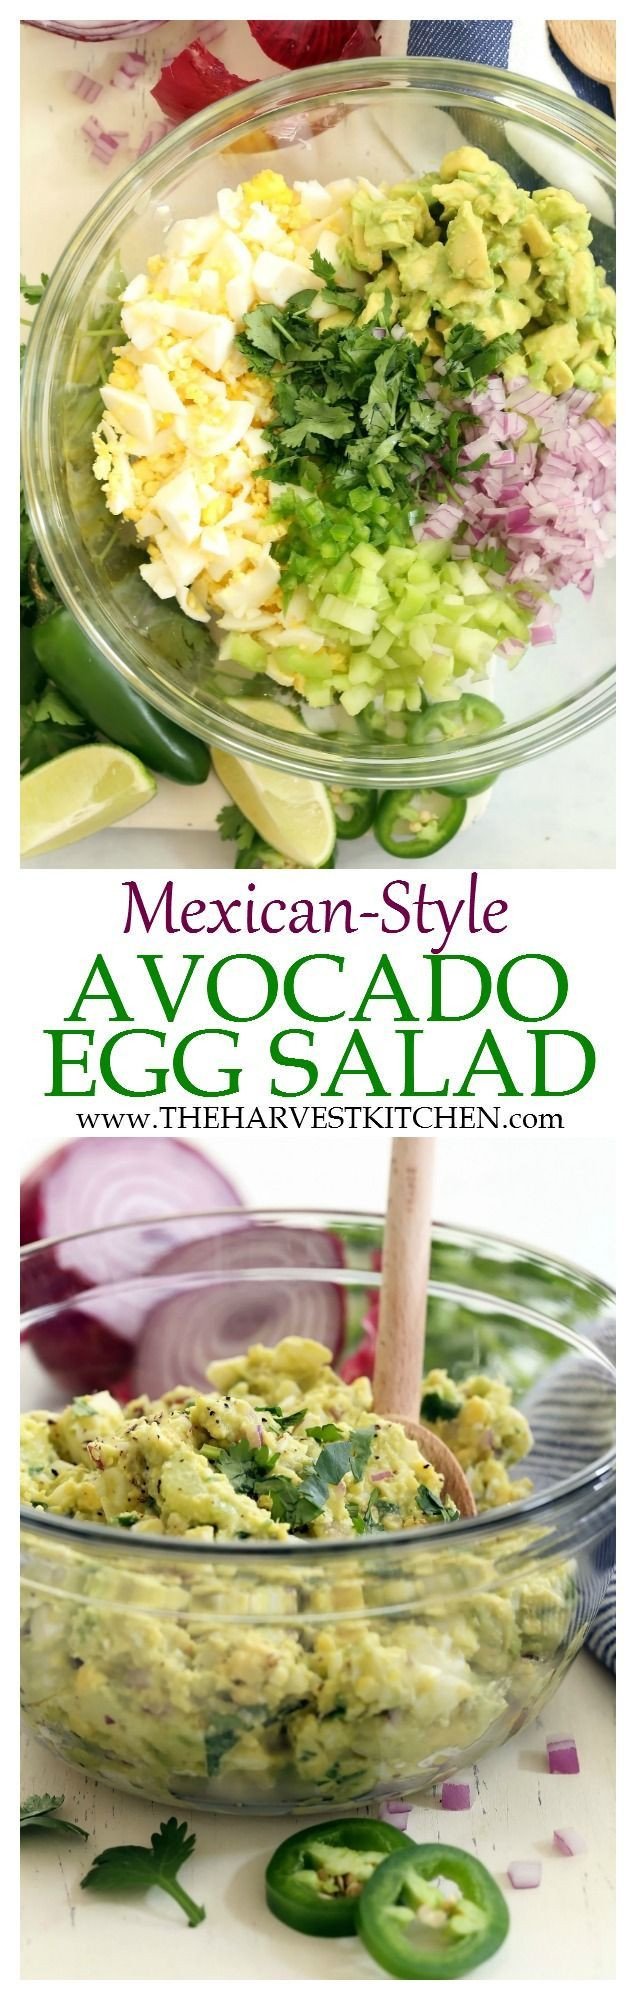 Low Fat Mexican Recipes
 The 25 best Clean eating ideas on Pinterest